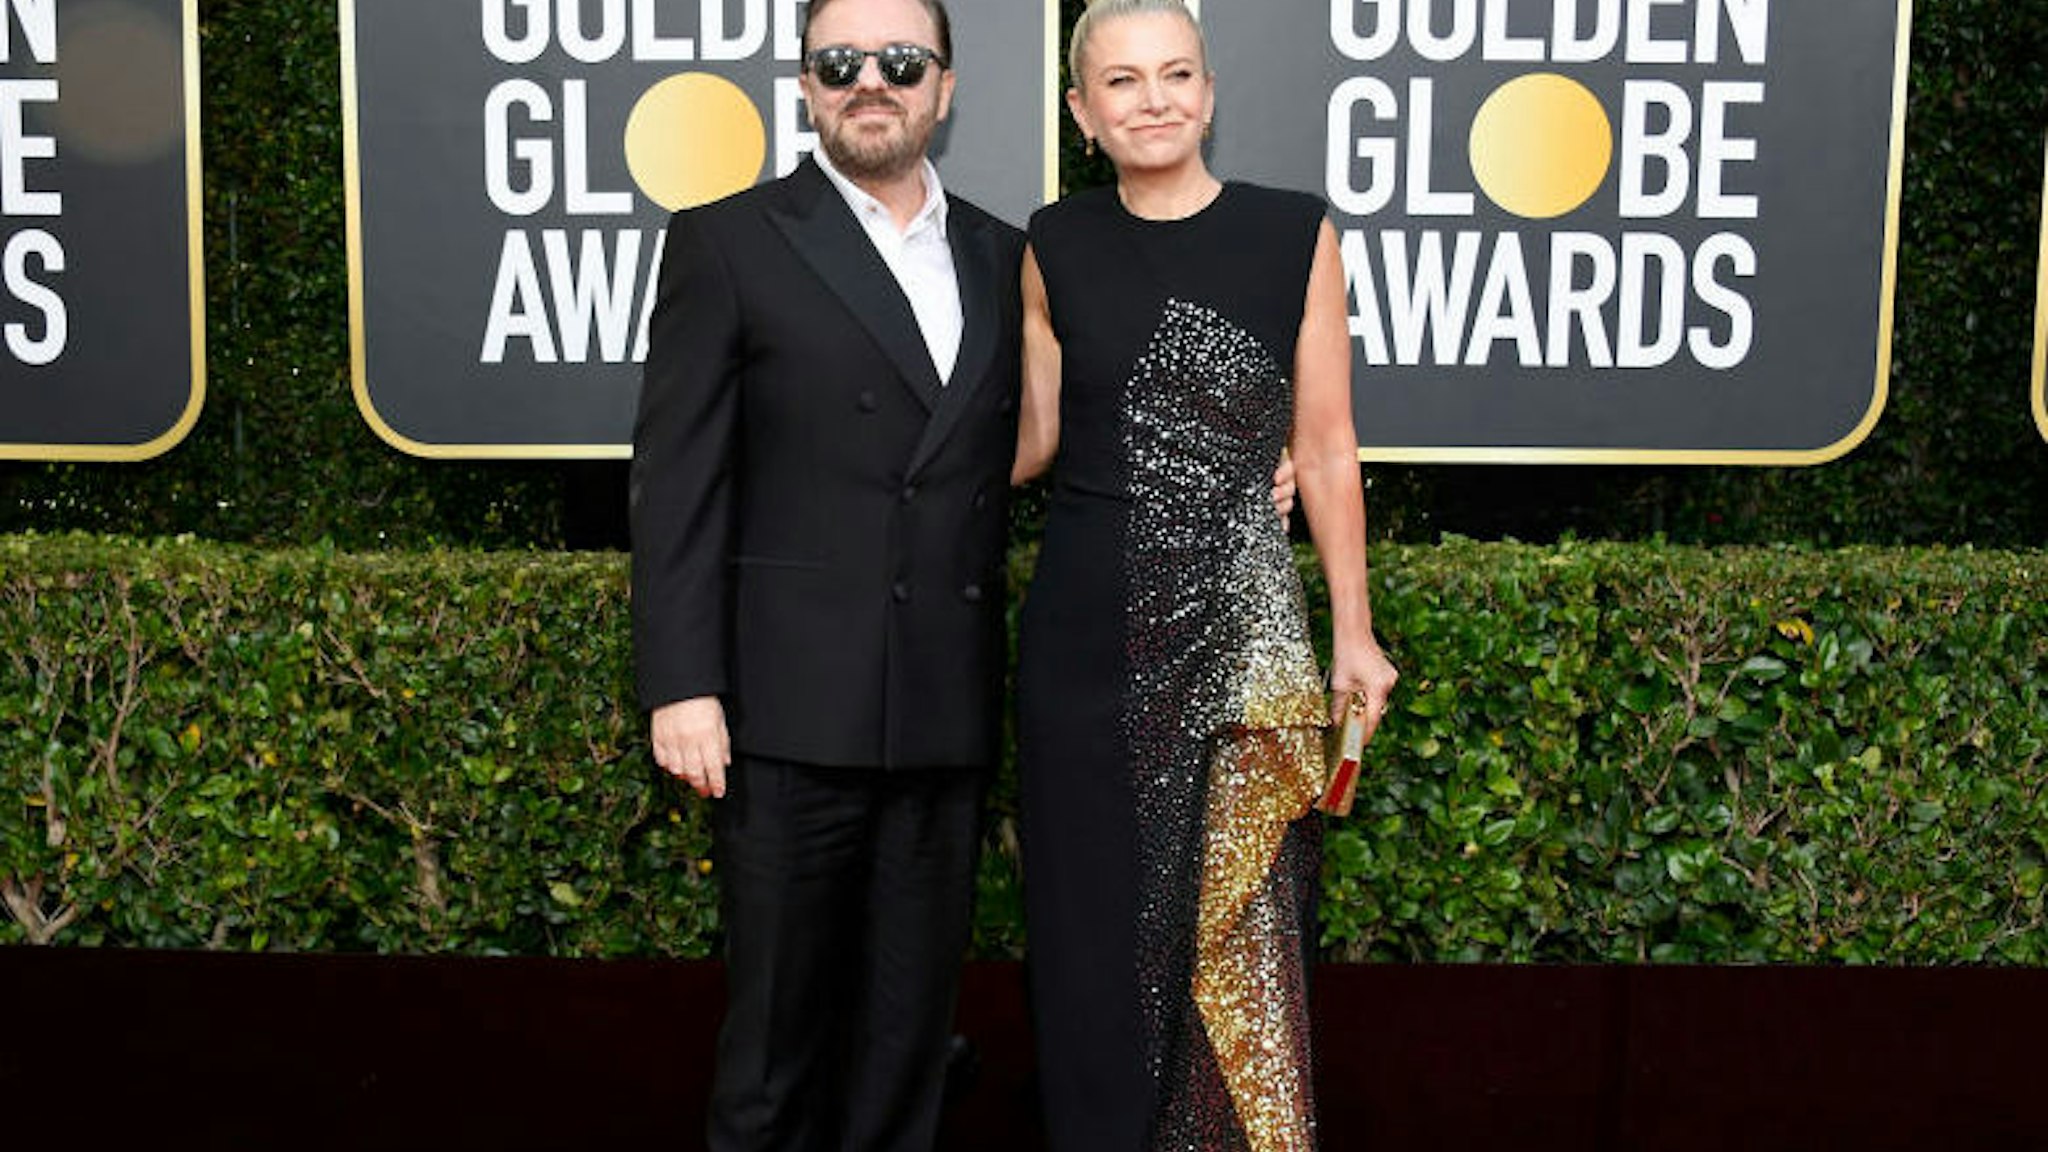 BEVERLY HILLS, CALIFORNIA - JANUARY 05: 77th ANNUAL GOLDEN GLOBE AWARDS -- Pictured: (l-r) Ricky Gervais and Jane Fallon arrive to the 77th Annual Golden Globe Awards held at the Beverly Hilton Hotel on January 5, 2020. --